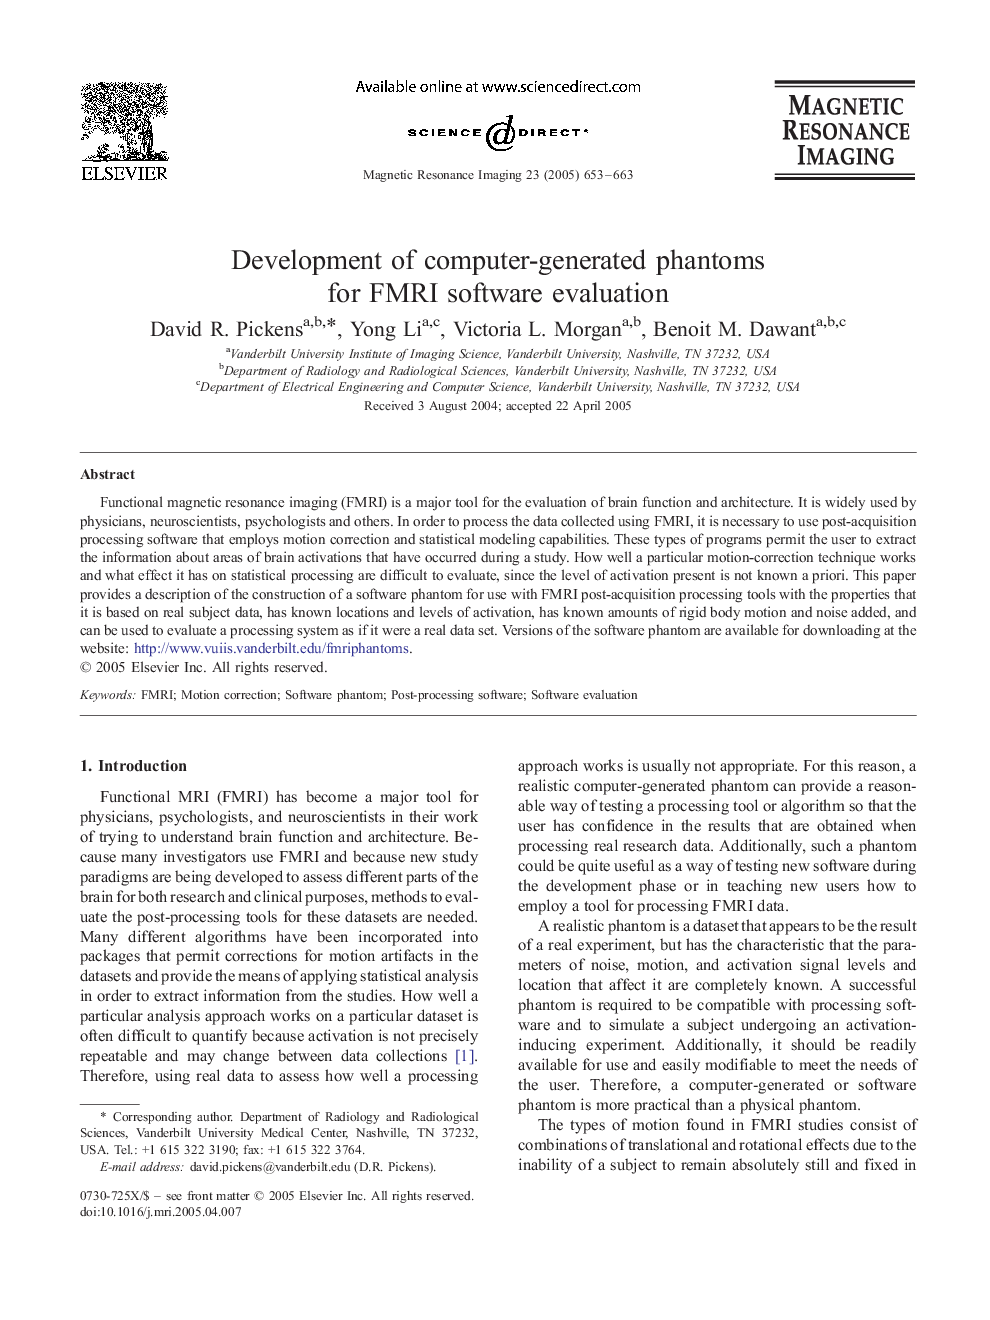 Development of computer-generated phantoms for FMRI software evaluation